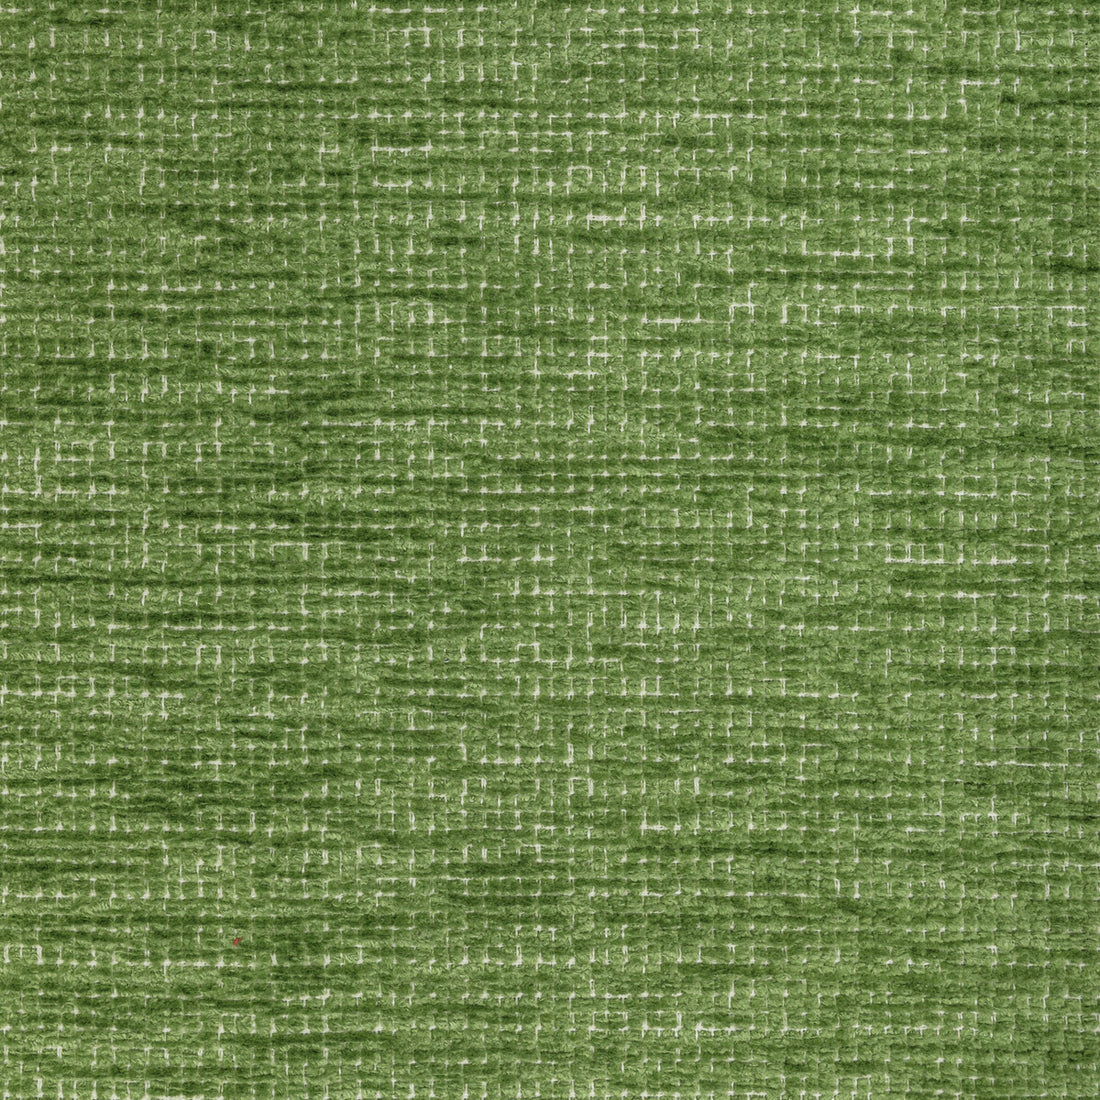 Lemenc Texture fabric in green color - pattern 8022124.3.0 - by Brunschwig &amp; Fils in the Chambery Textures III collection